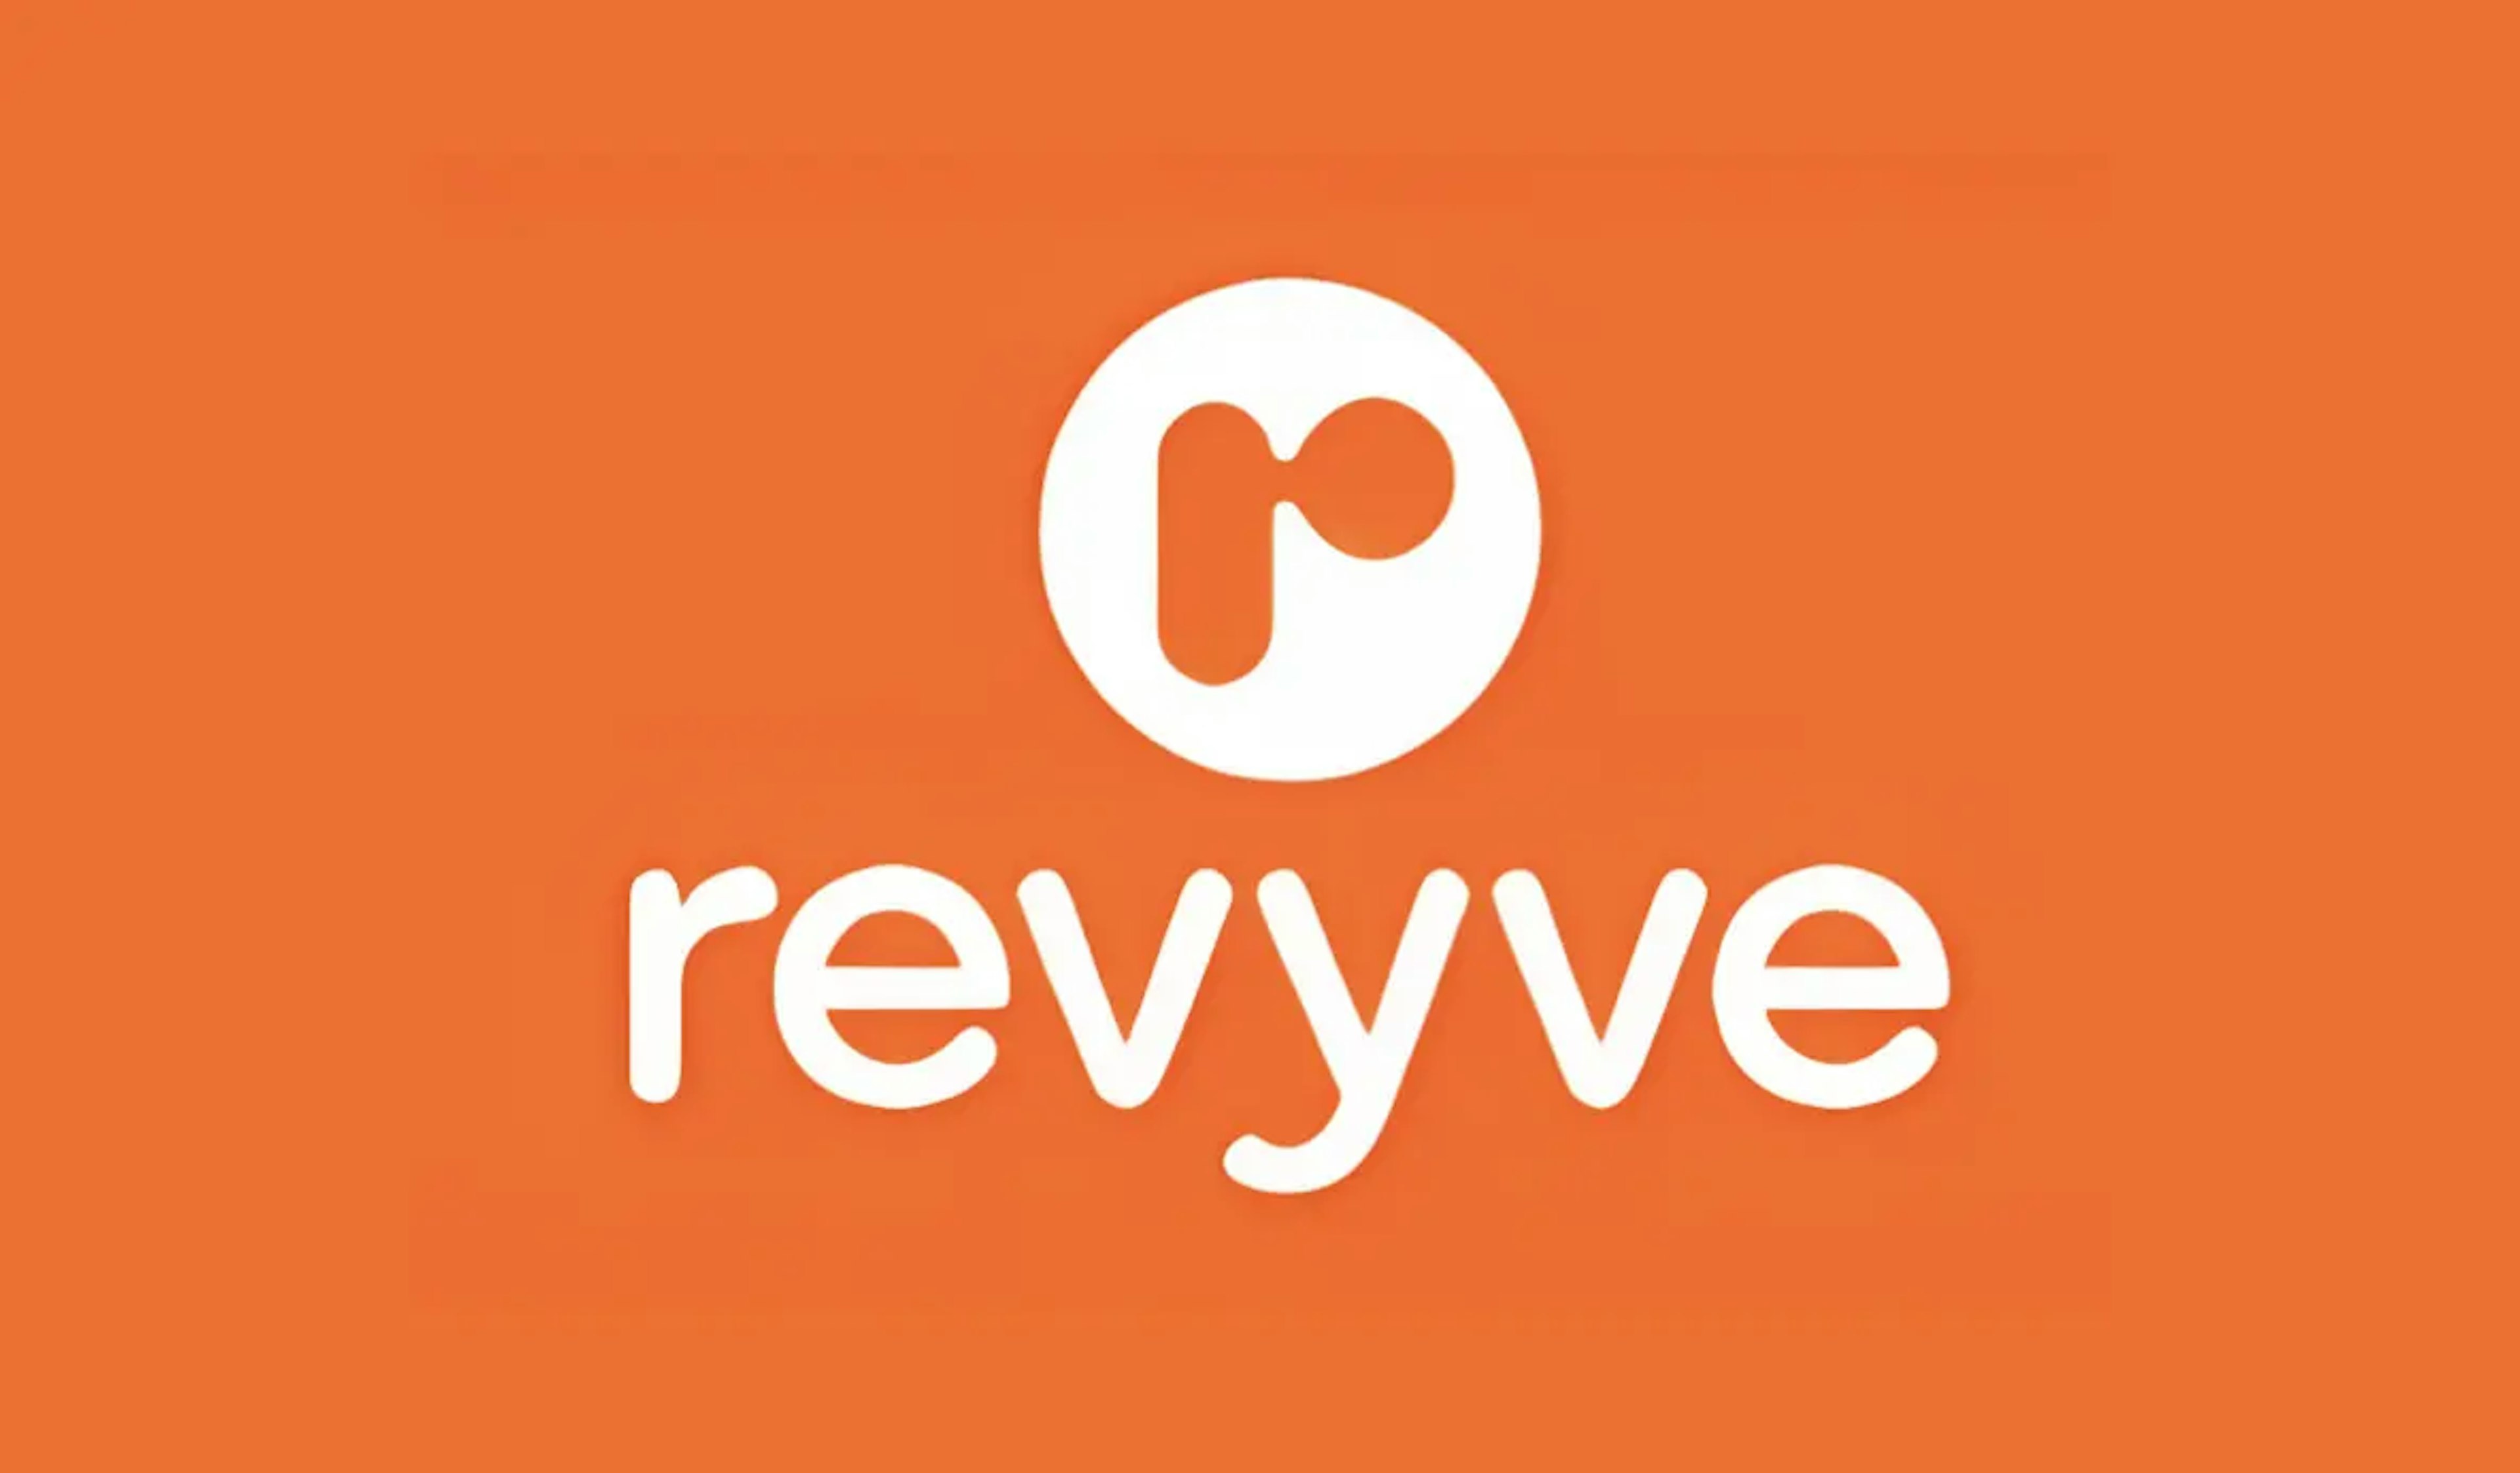 Wageningen, Netherlands – Revyve, a trailblazer in sustainable food production, has selected Opvia as its trusted partner for its Electronic Batch Records (EBR) solution.